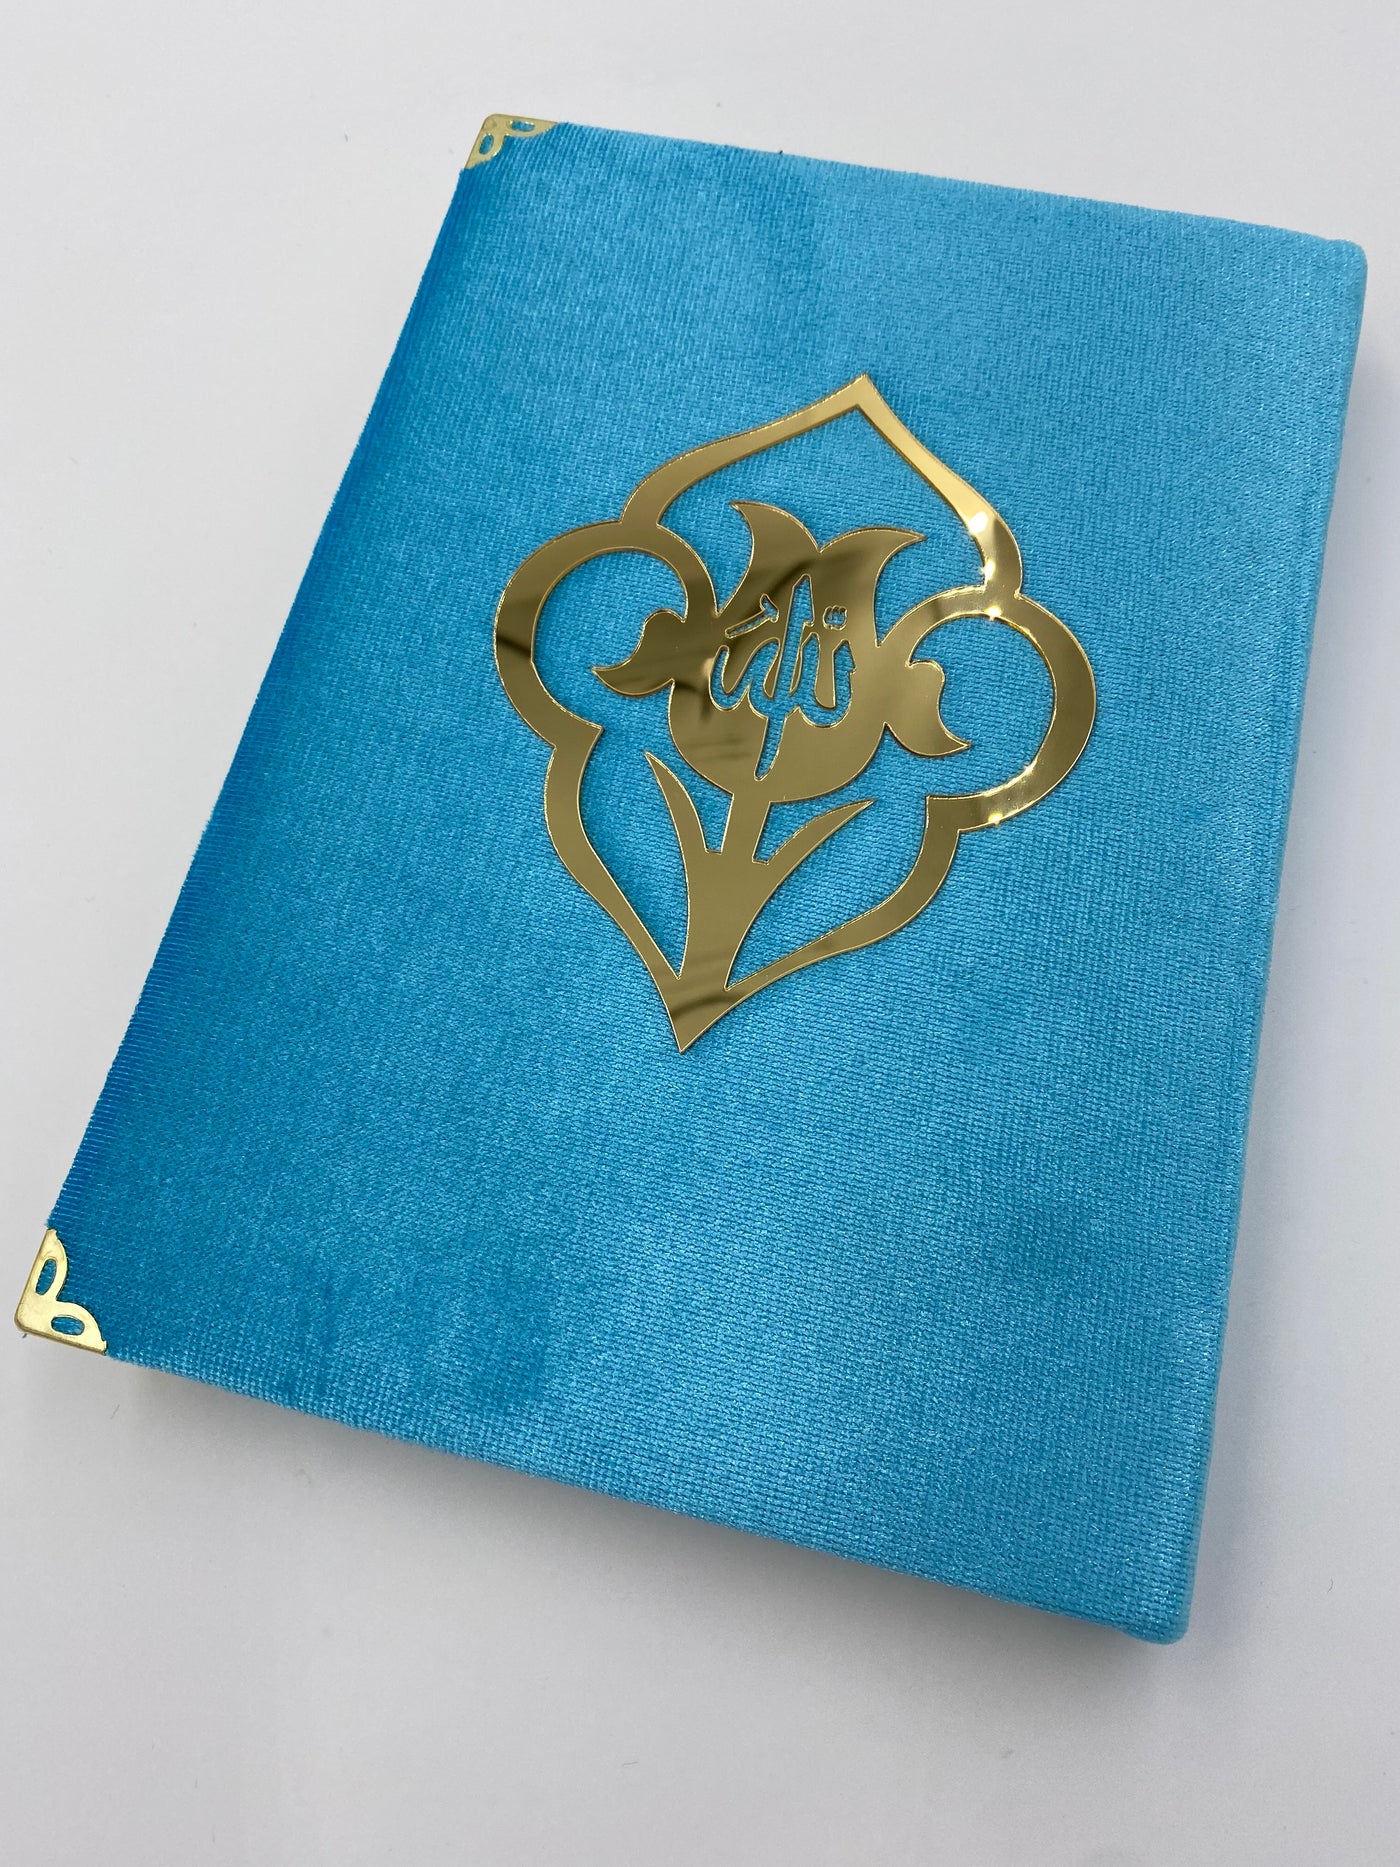 The Noble Quran cover Suede